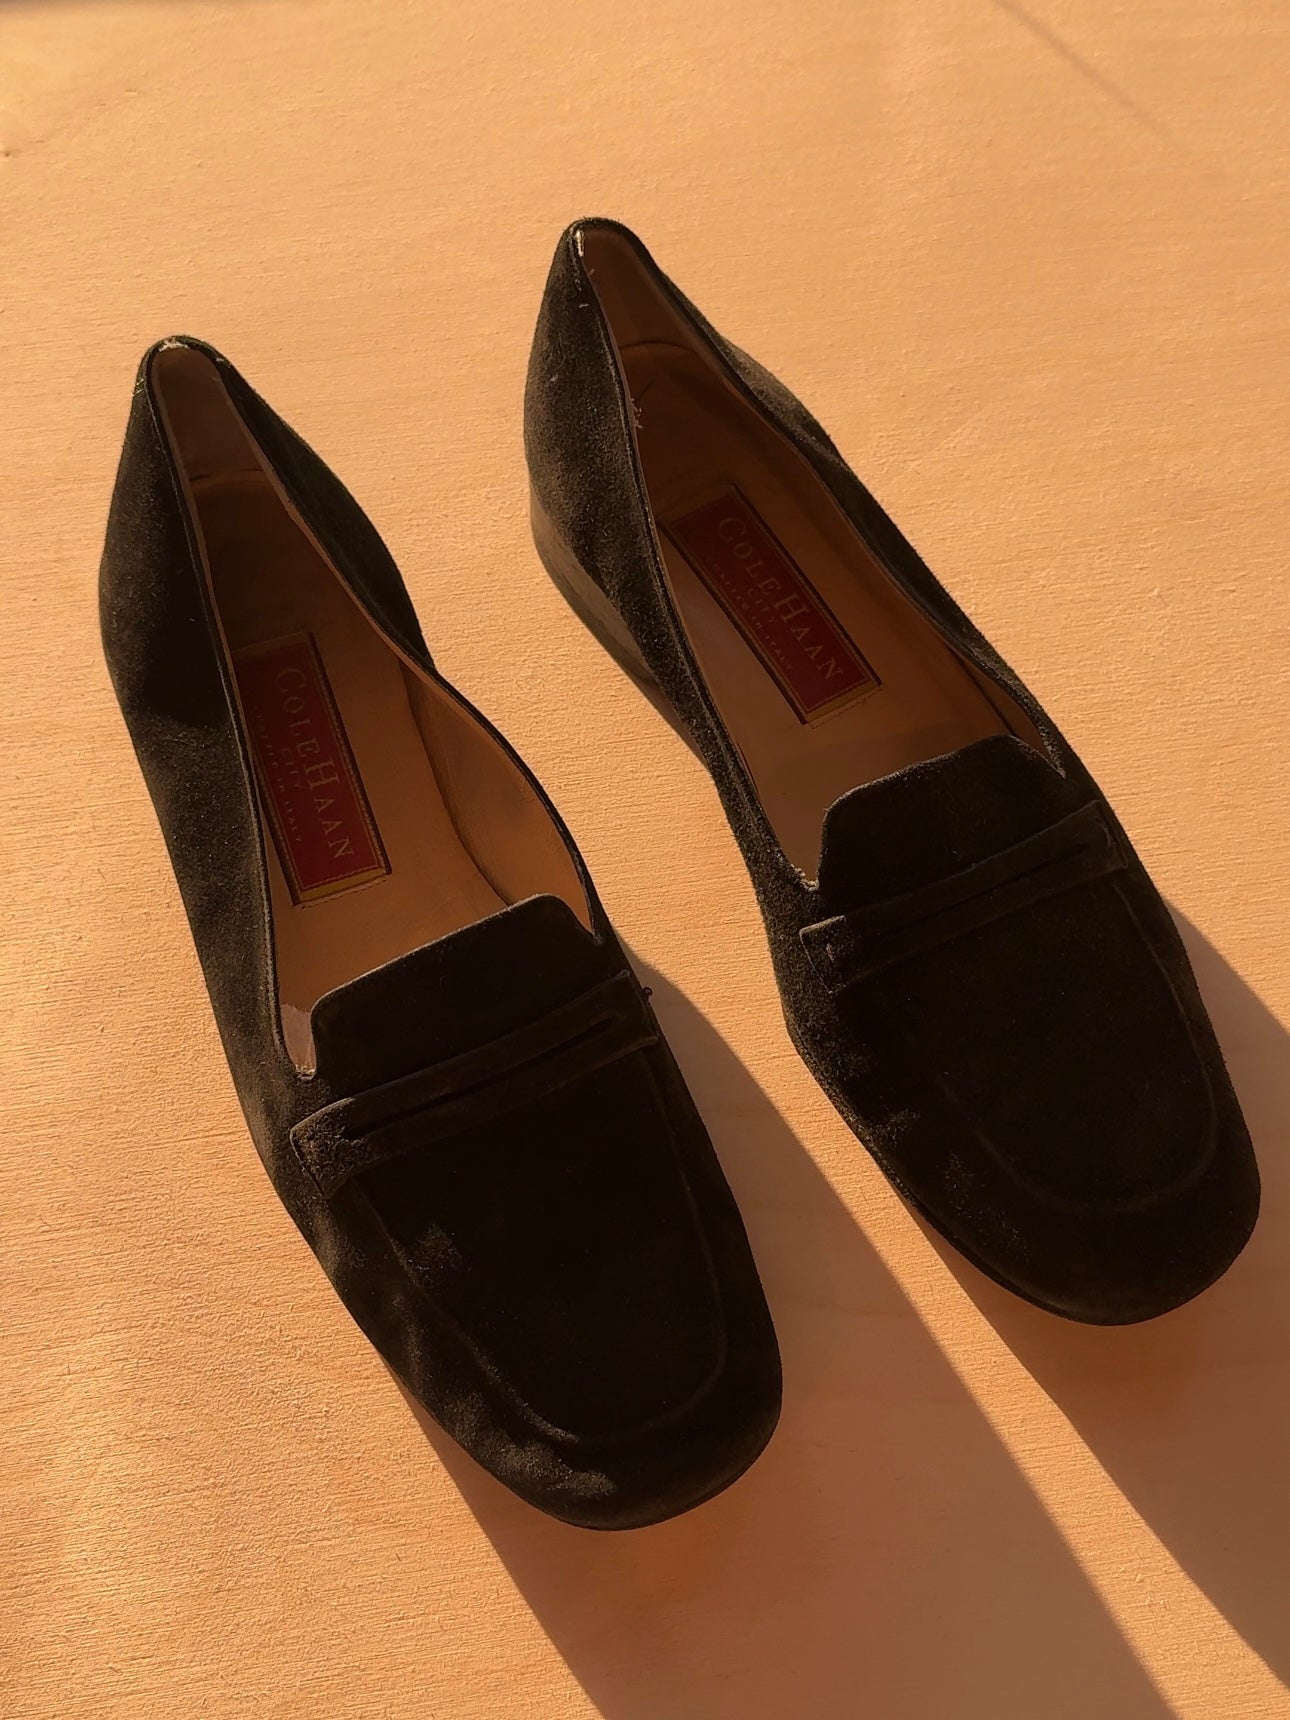 Vintage Italian Noire Sueded Leather Loafer Pumps, 7B